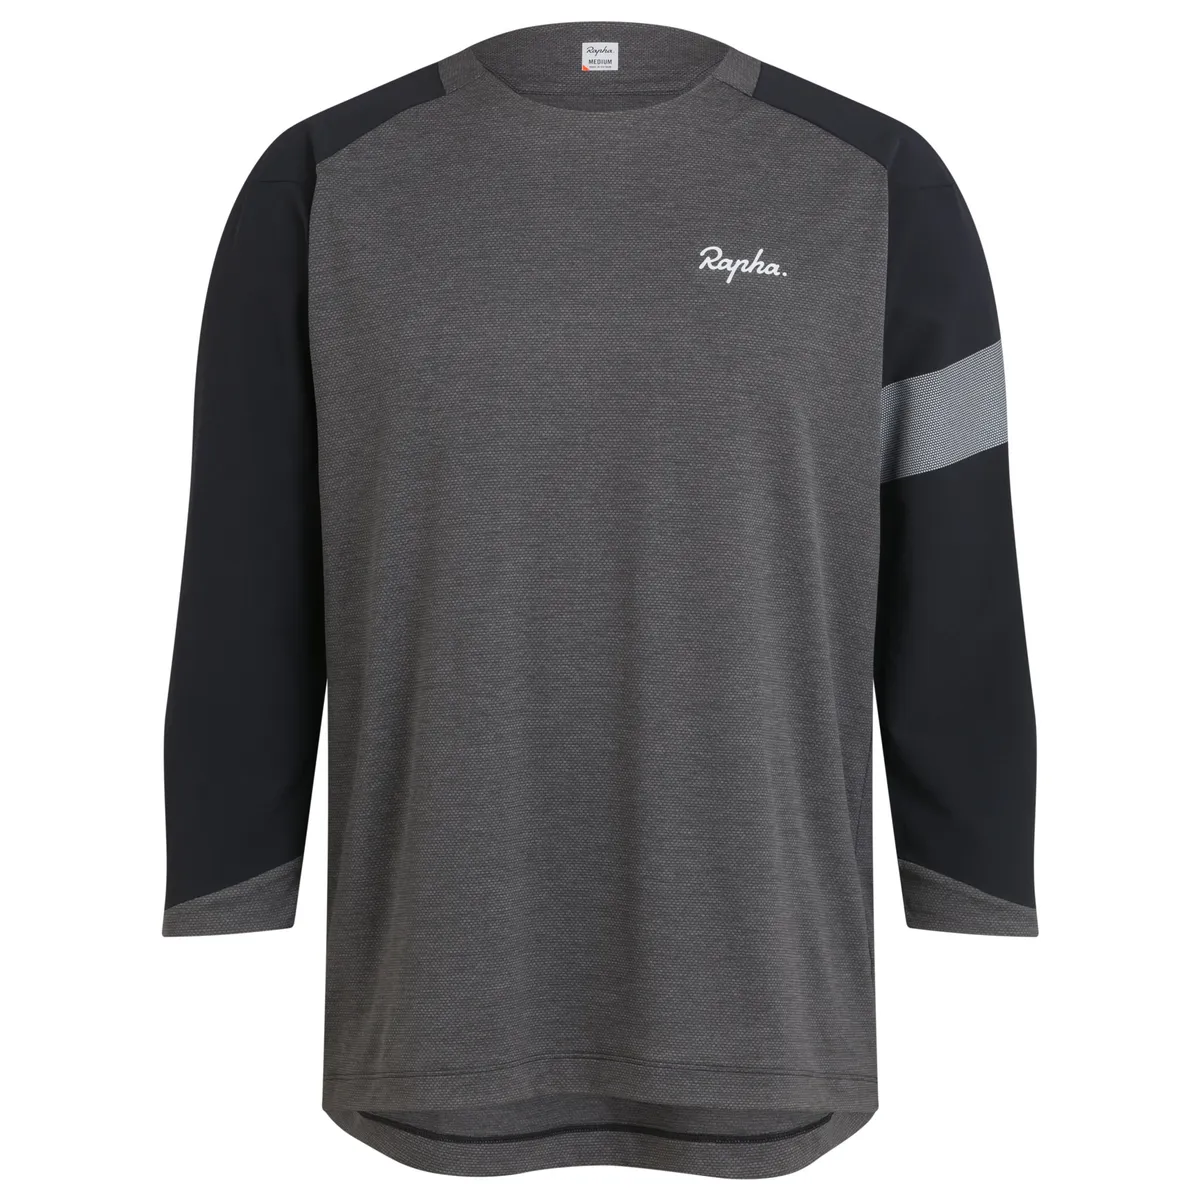 Rapha Trail ¾ Sleeve Jersey in Anthracite